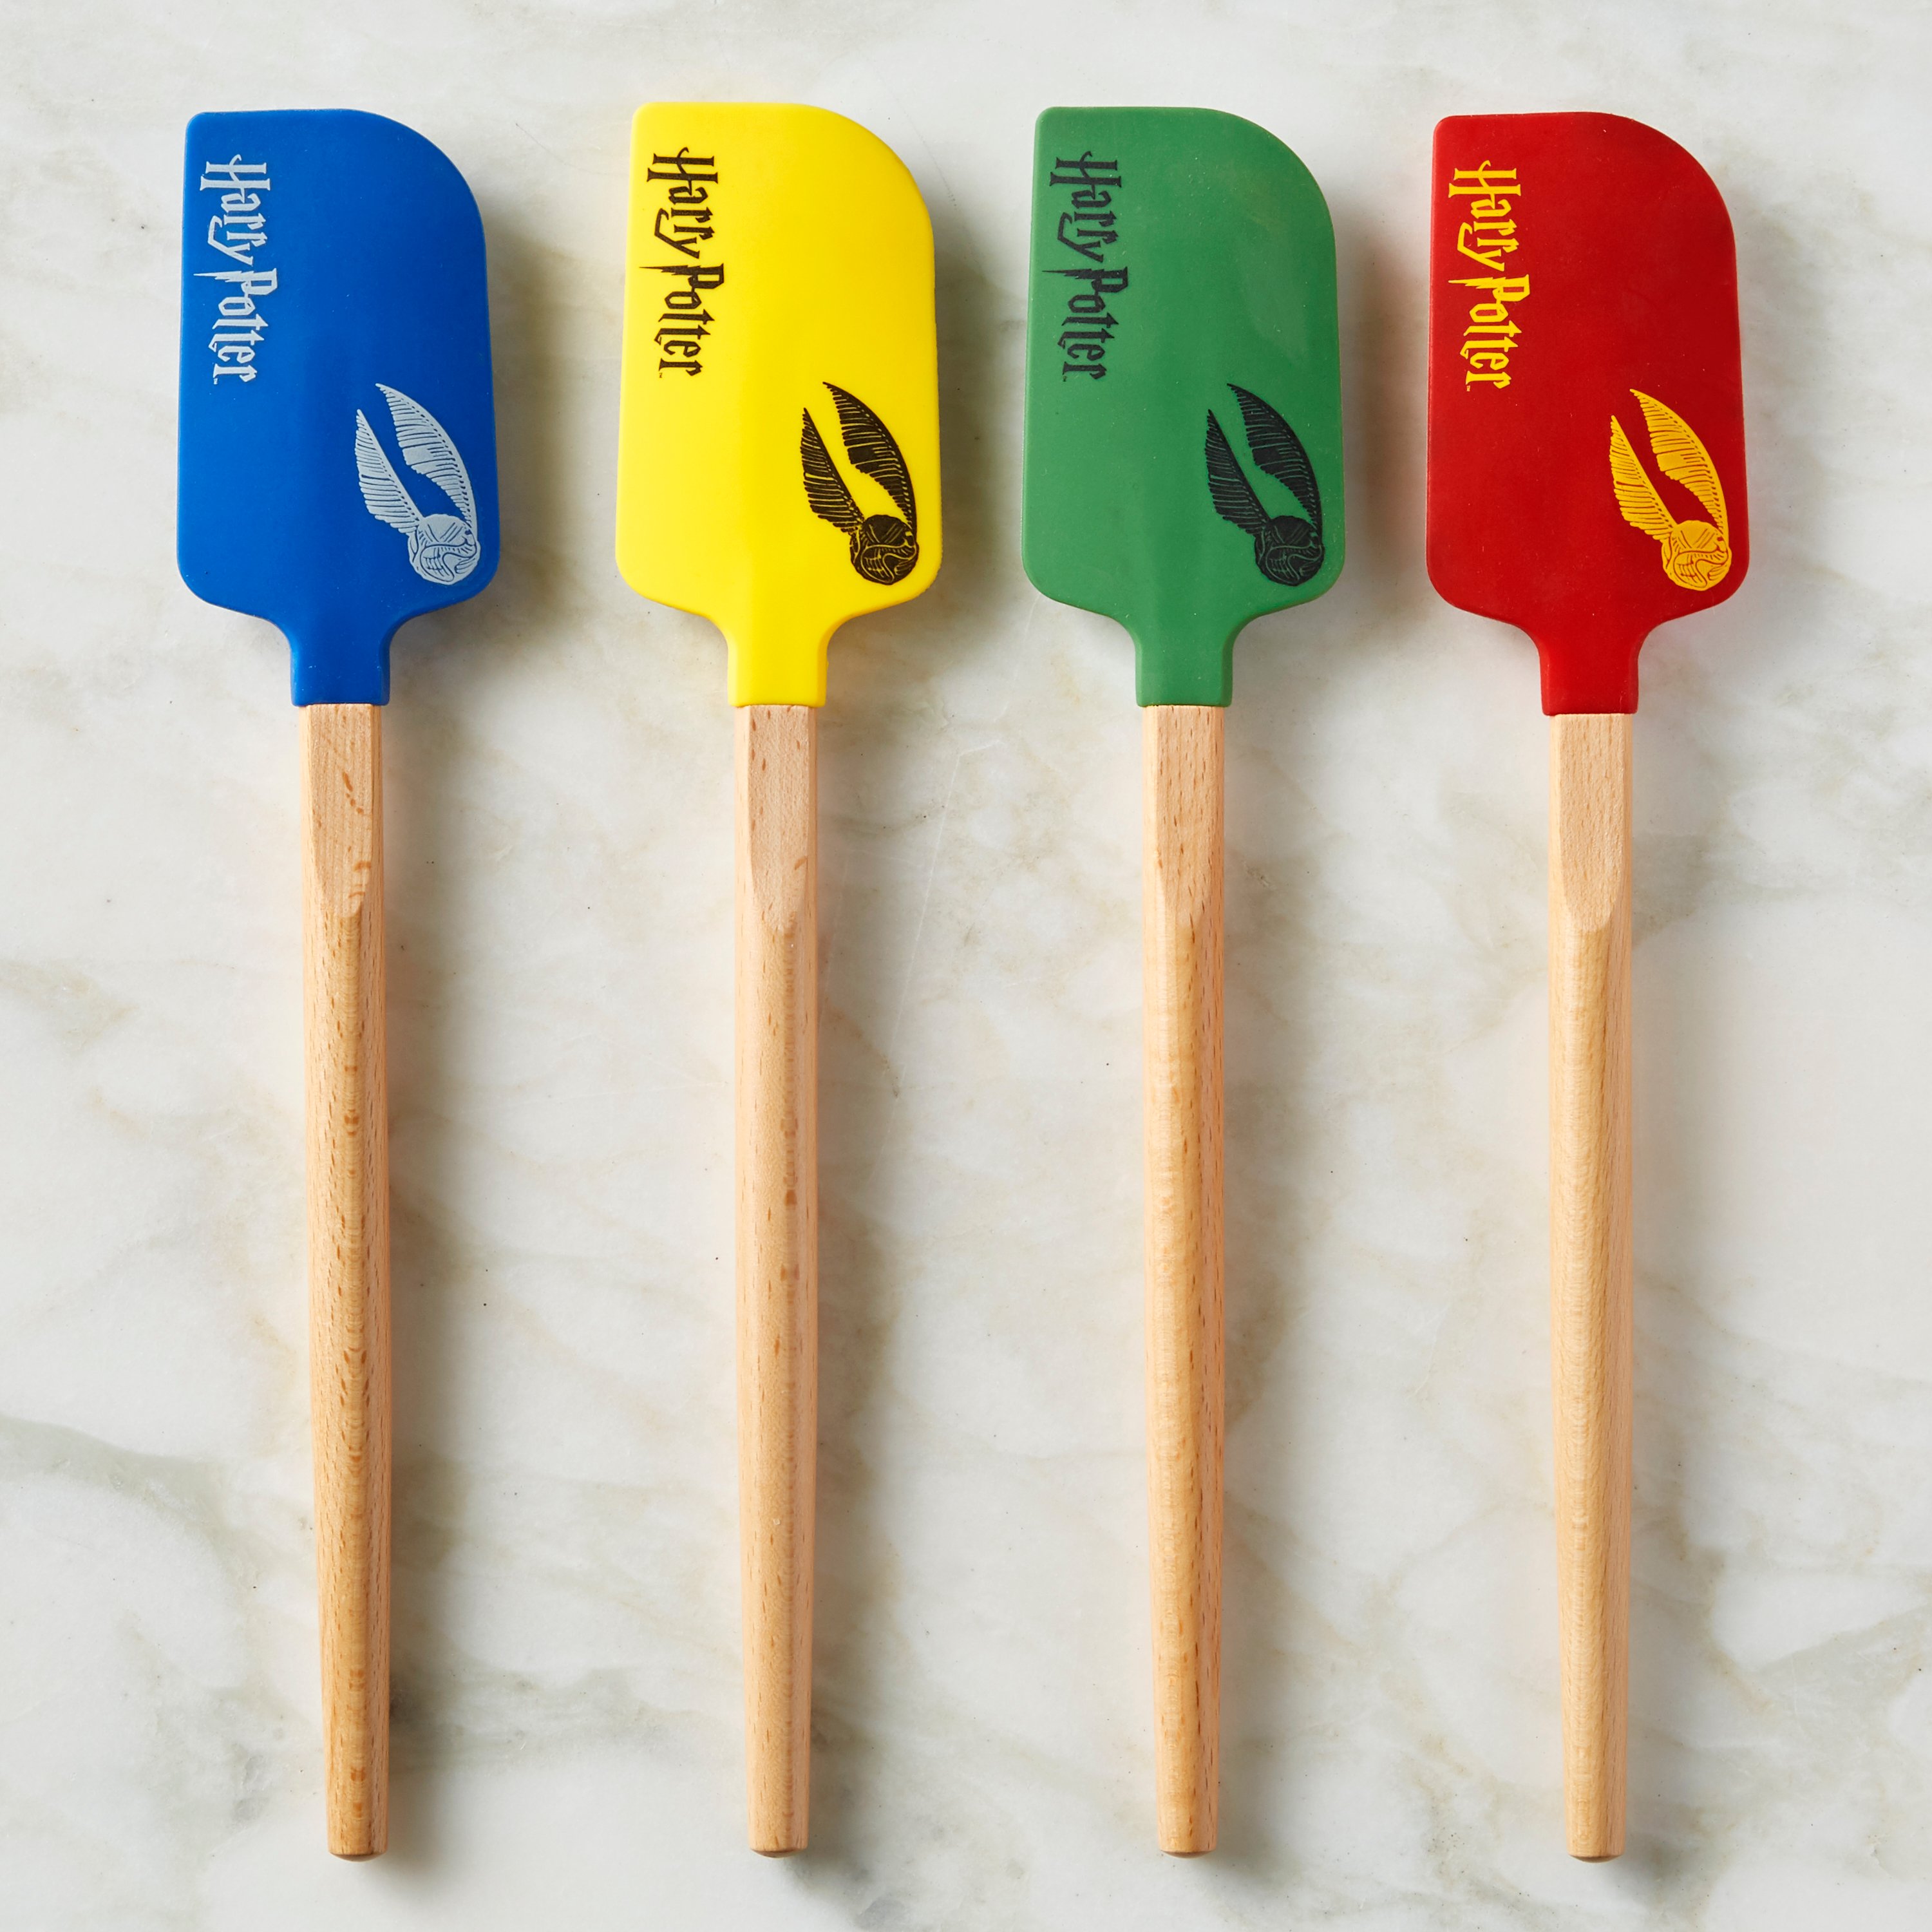 Blue, yellow, green and red spatula that say Harry Potter